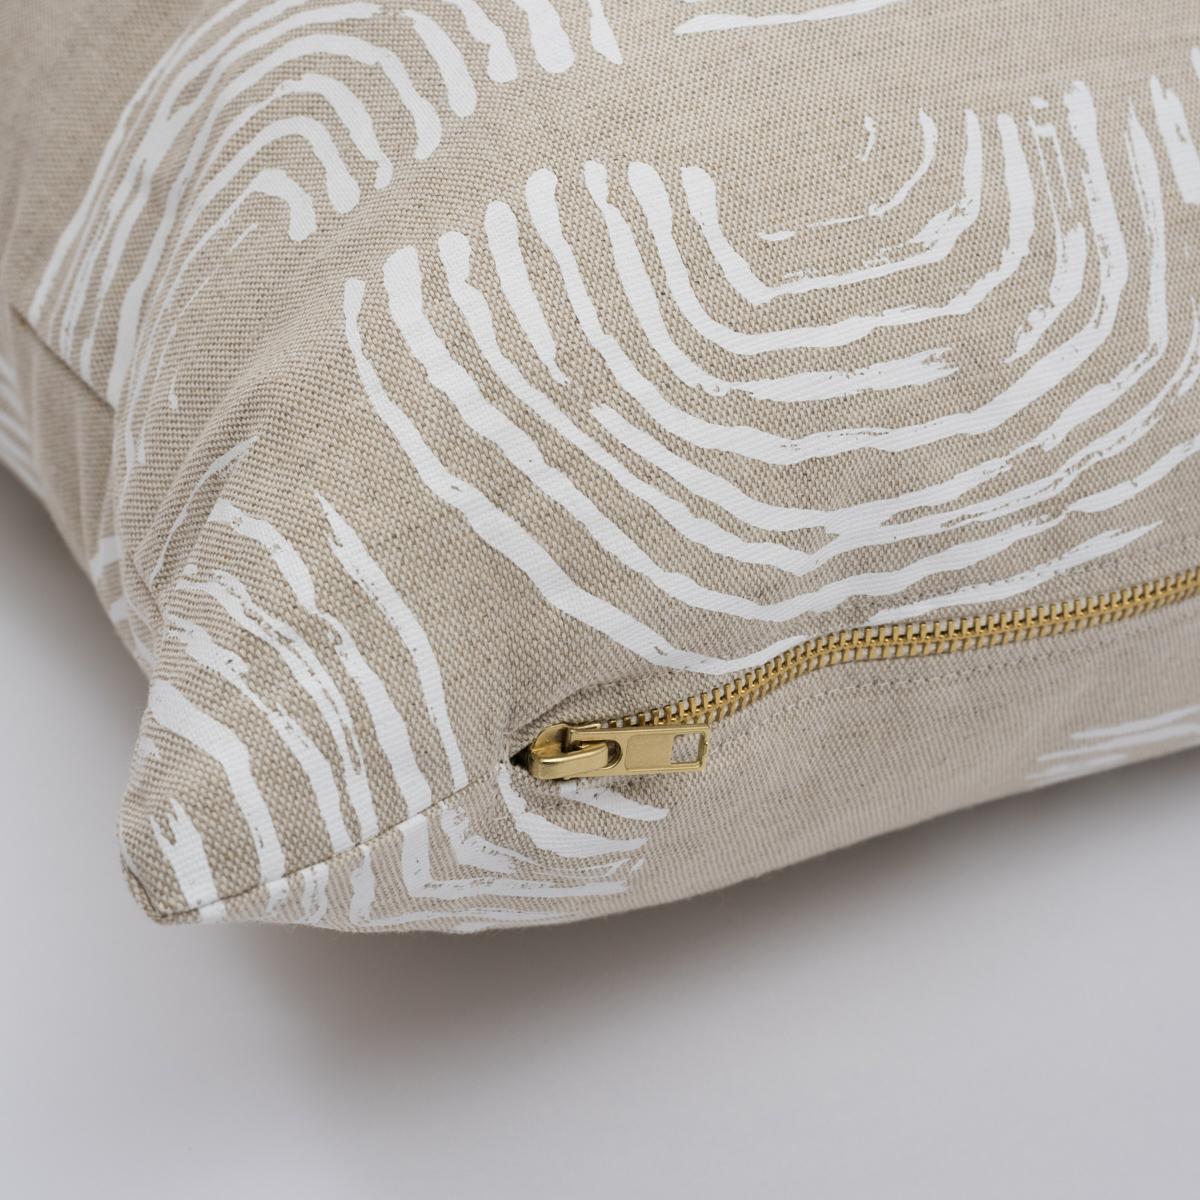 This pillow features Squiggles by Caroline Z Hurley with a knife edge finish. The repeated rainbow-shaped curves of this ivory-on-natural fabric's loose, painterly pattern are printed on a linen-cotton-blend fabric. Pillow includes a feather/down